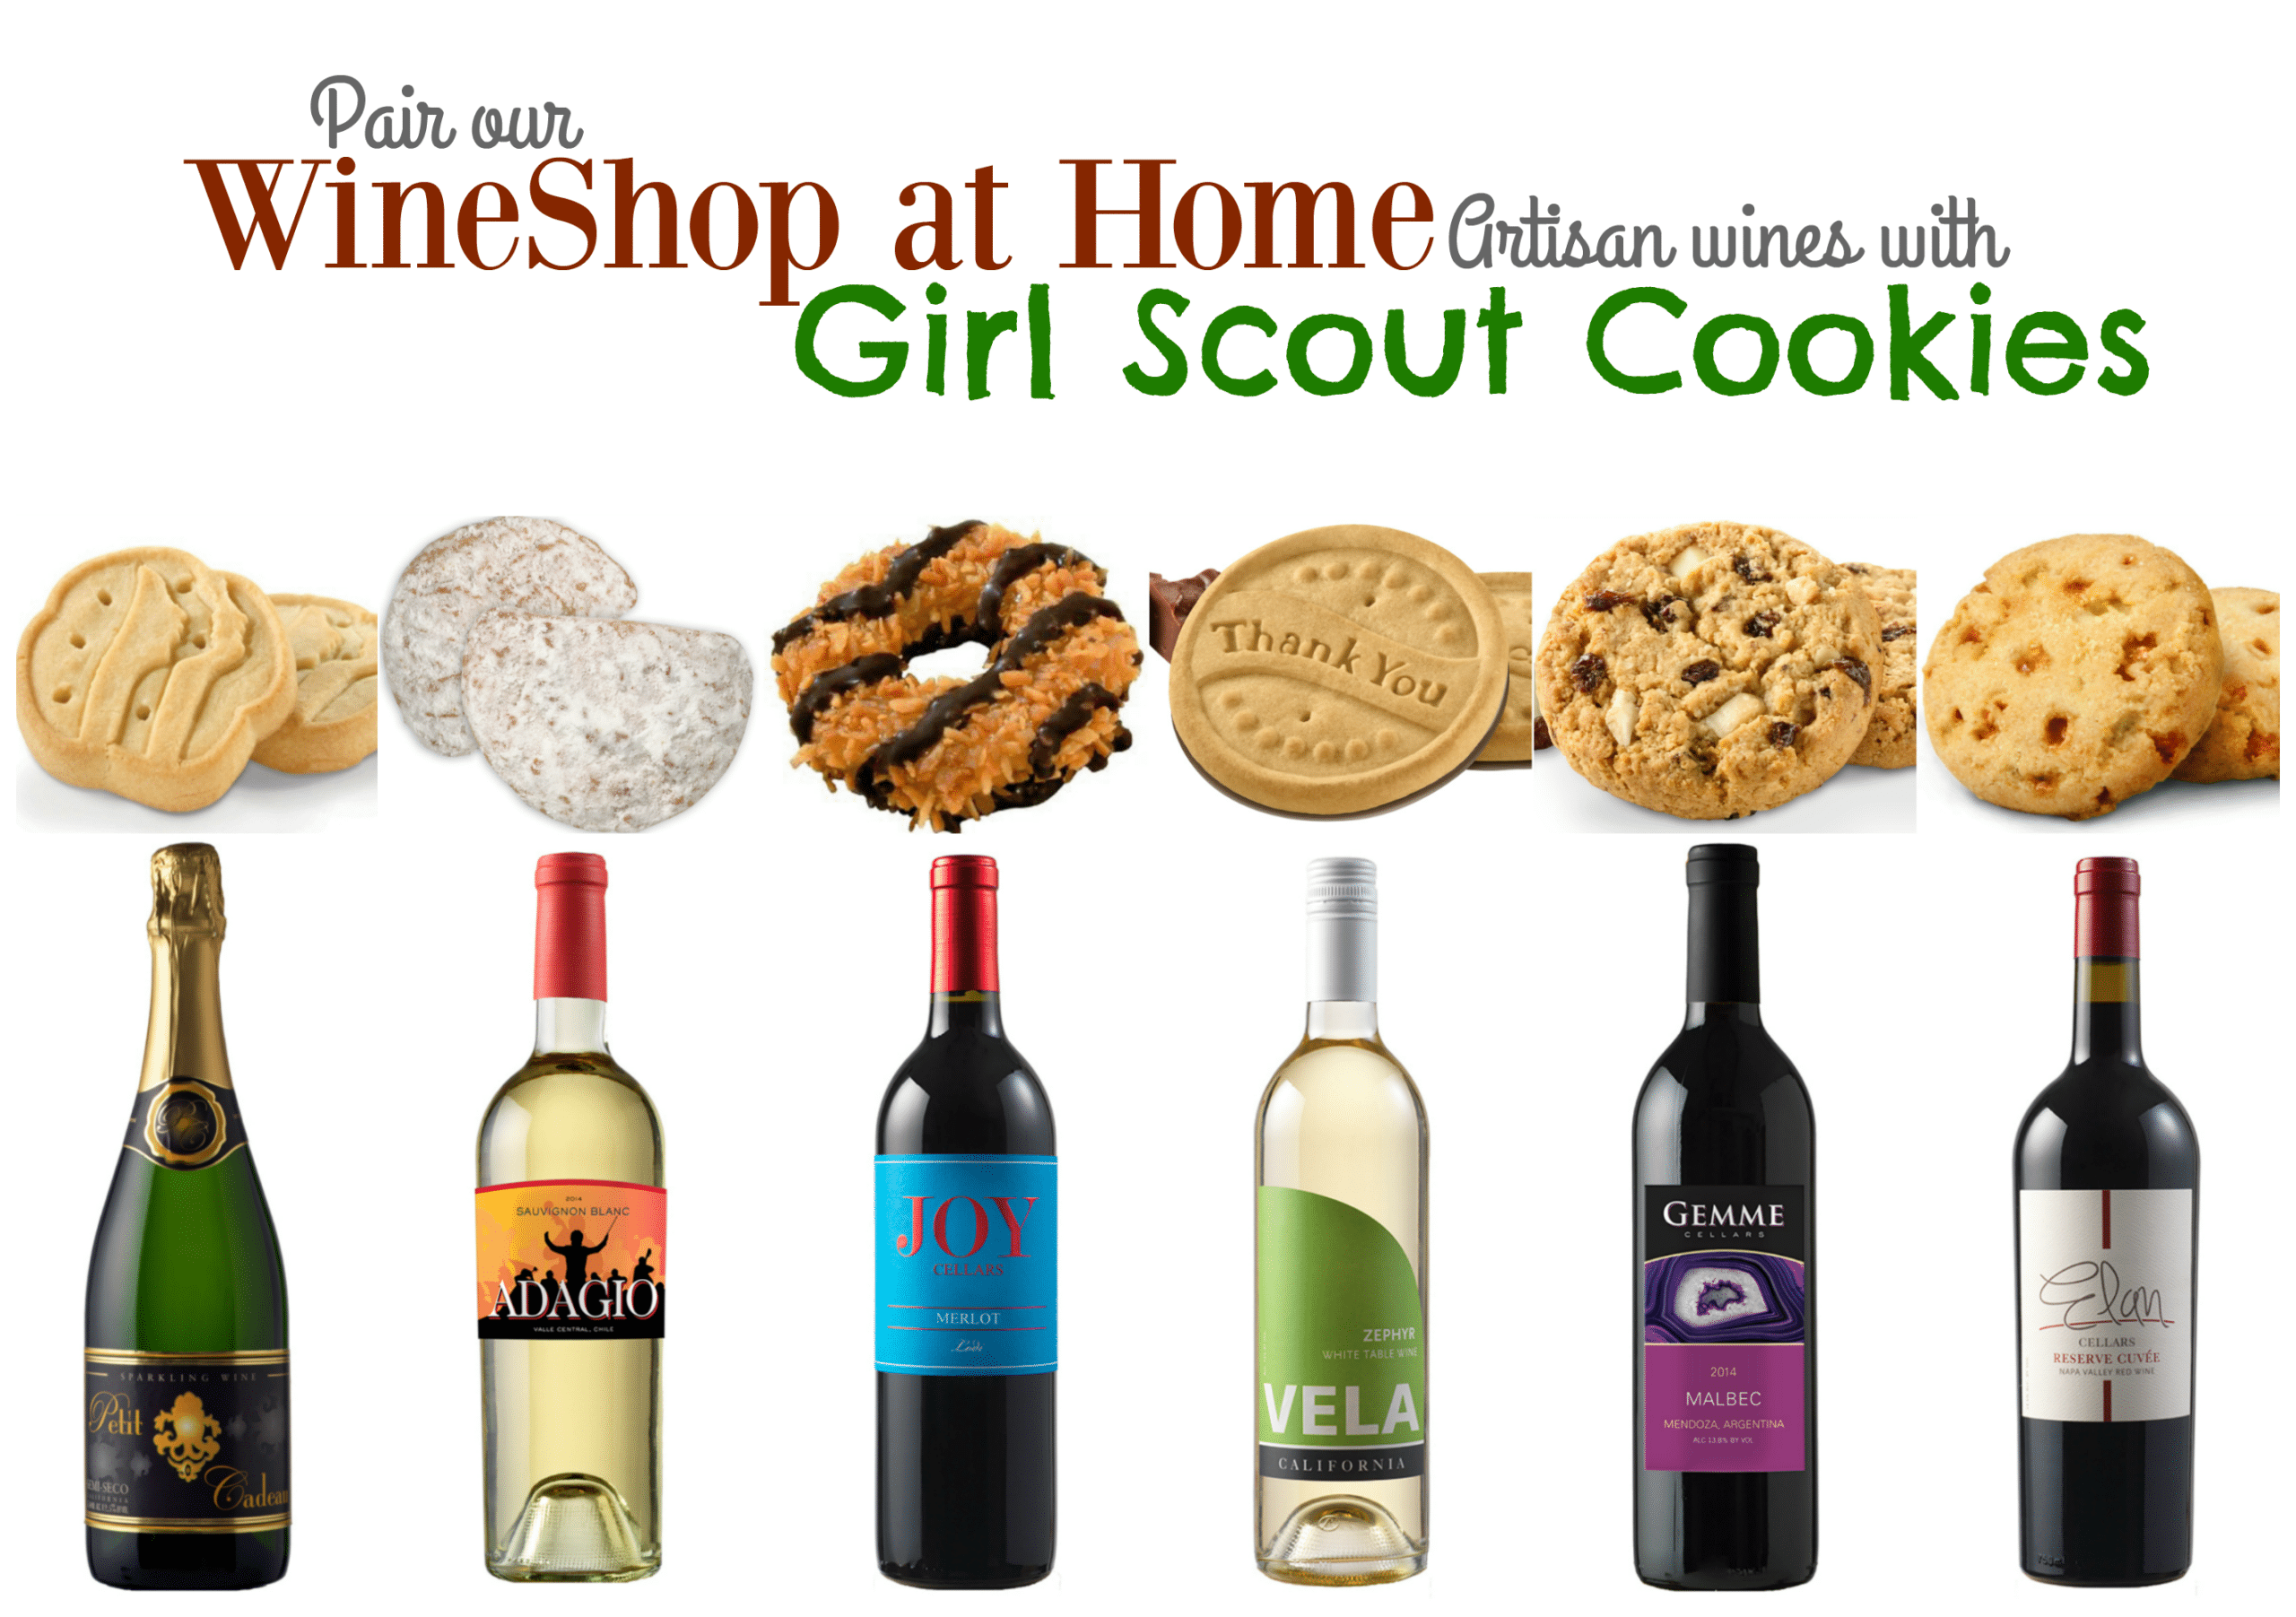 Girl Scout Cookies and WineShop at Home Wine